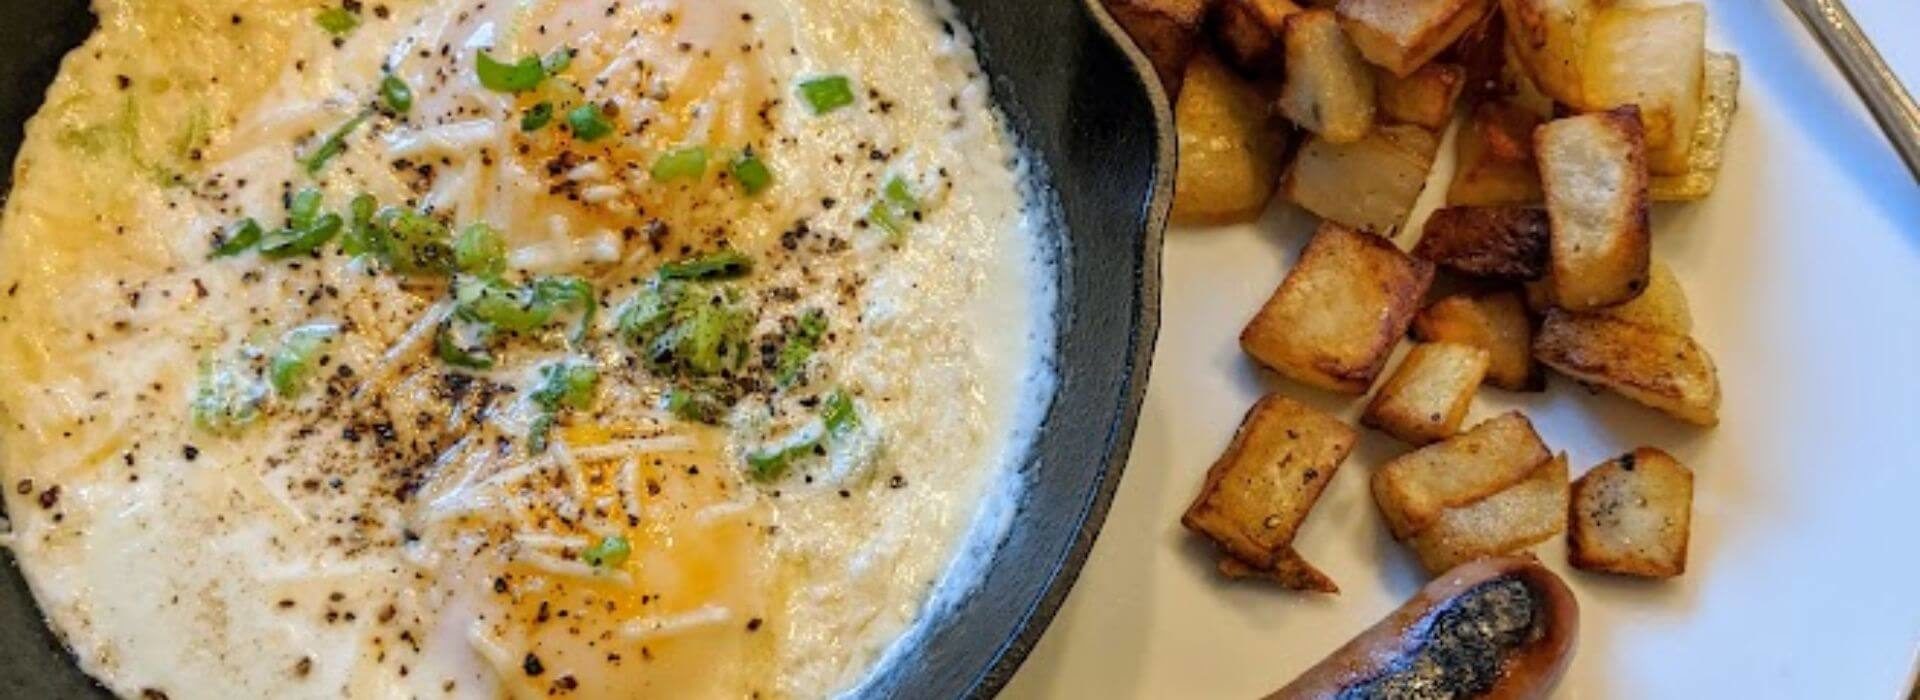 a black cast iron skillet with baked eggs inside, covered with bits of parmesan cheese, cracked black pepper, and chopped green onions, with a side of crispy golden potato pieces.